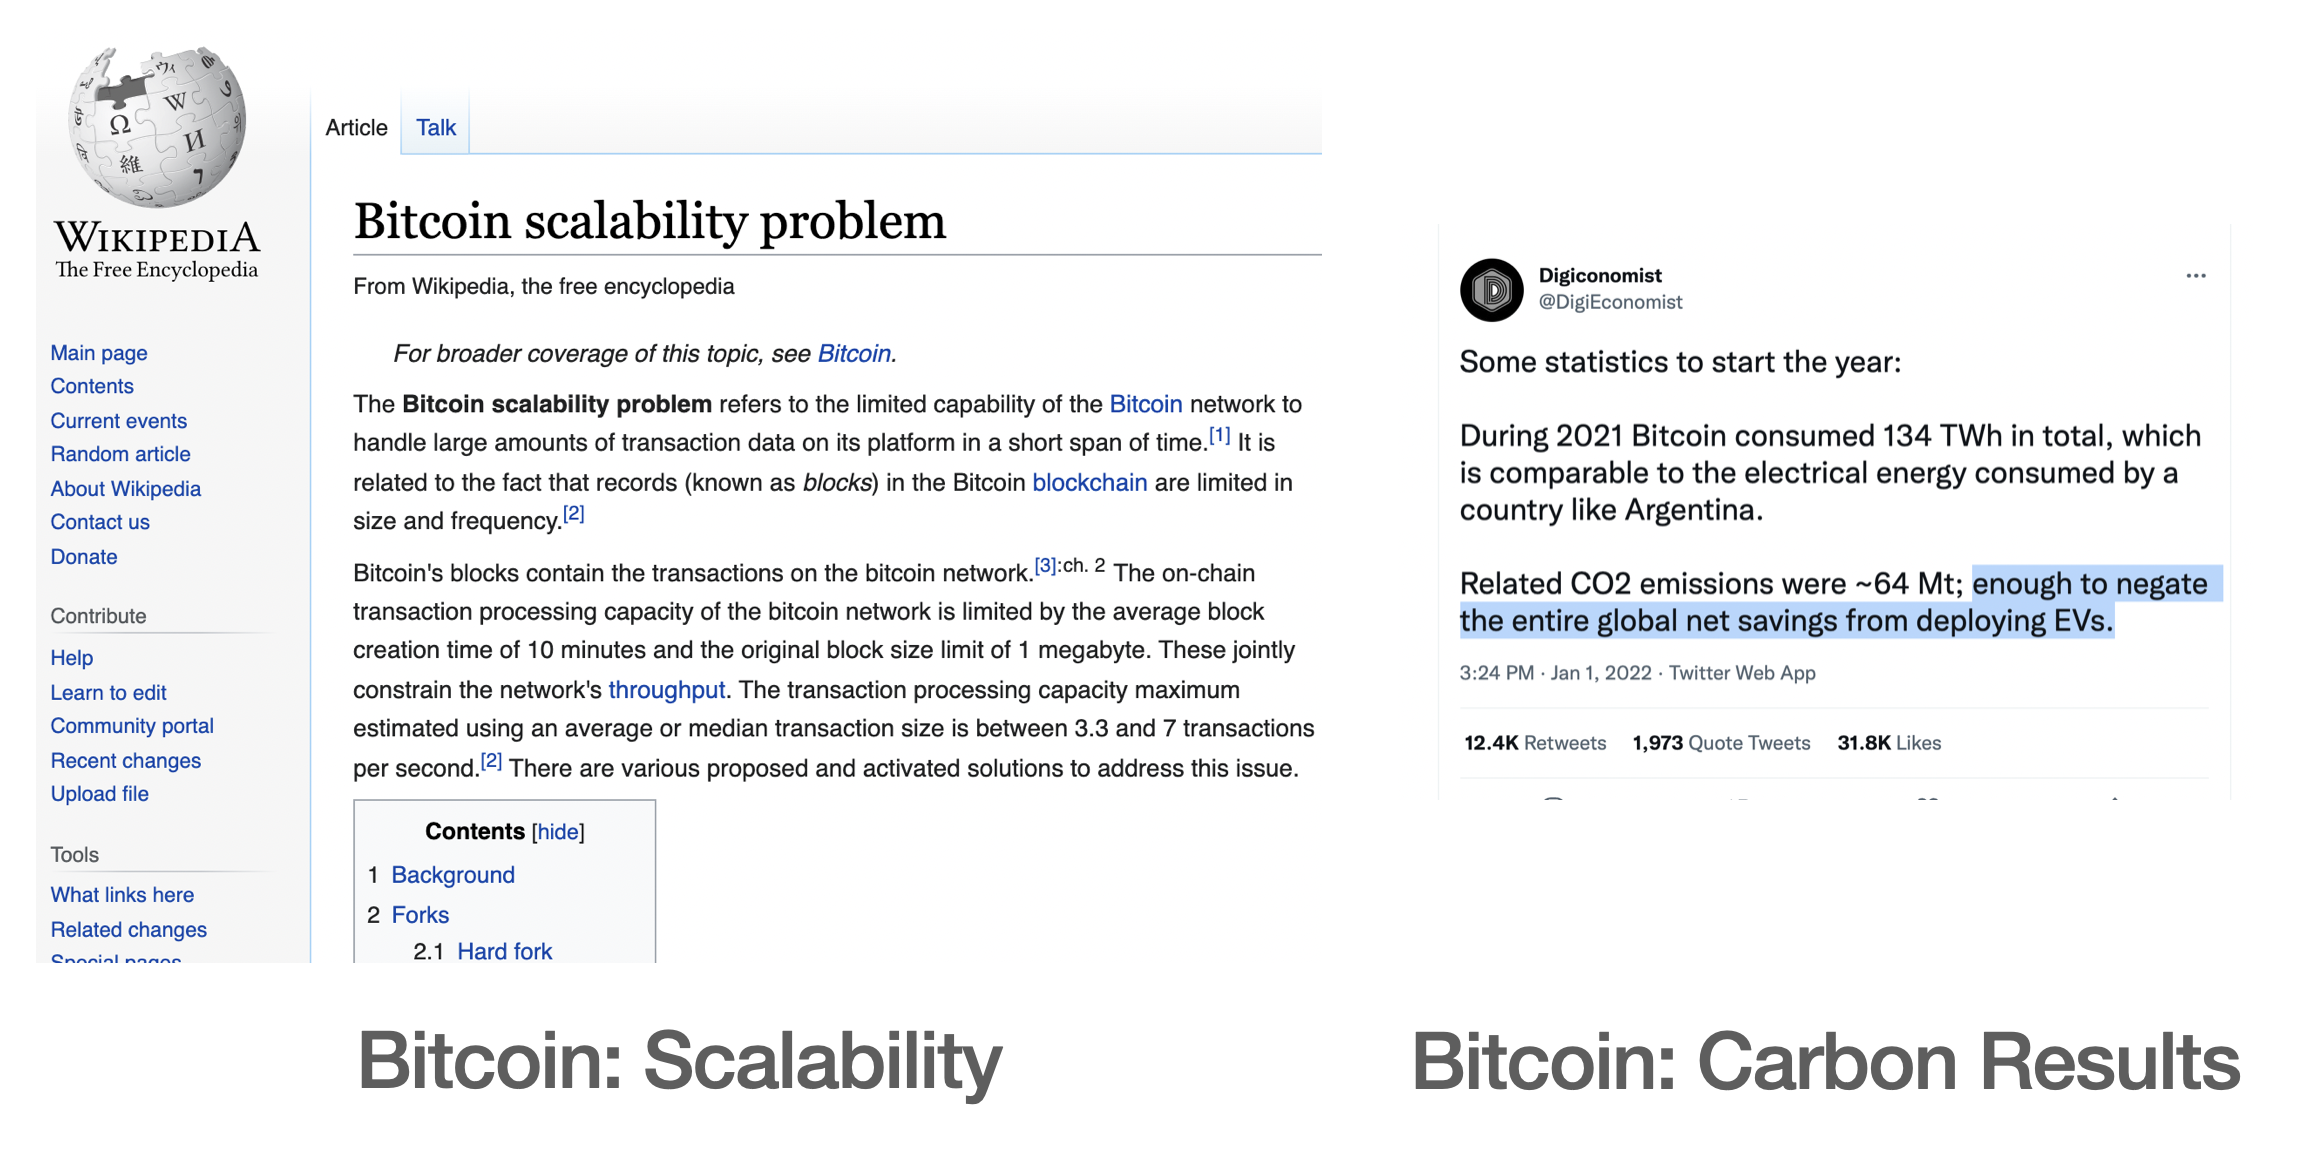 The bitcoin network has terrible scalability despite the enormous carbot footprint